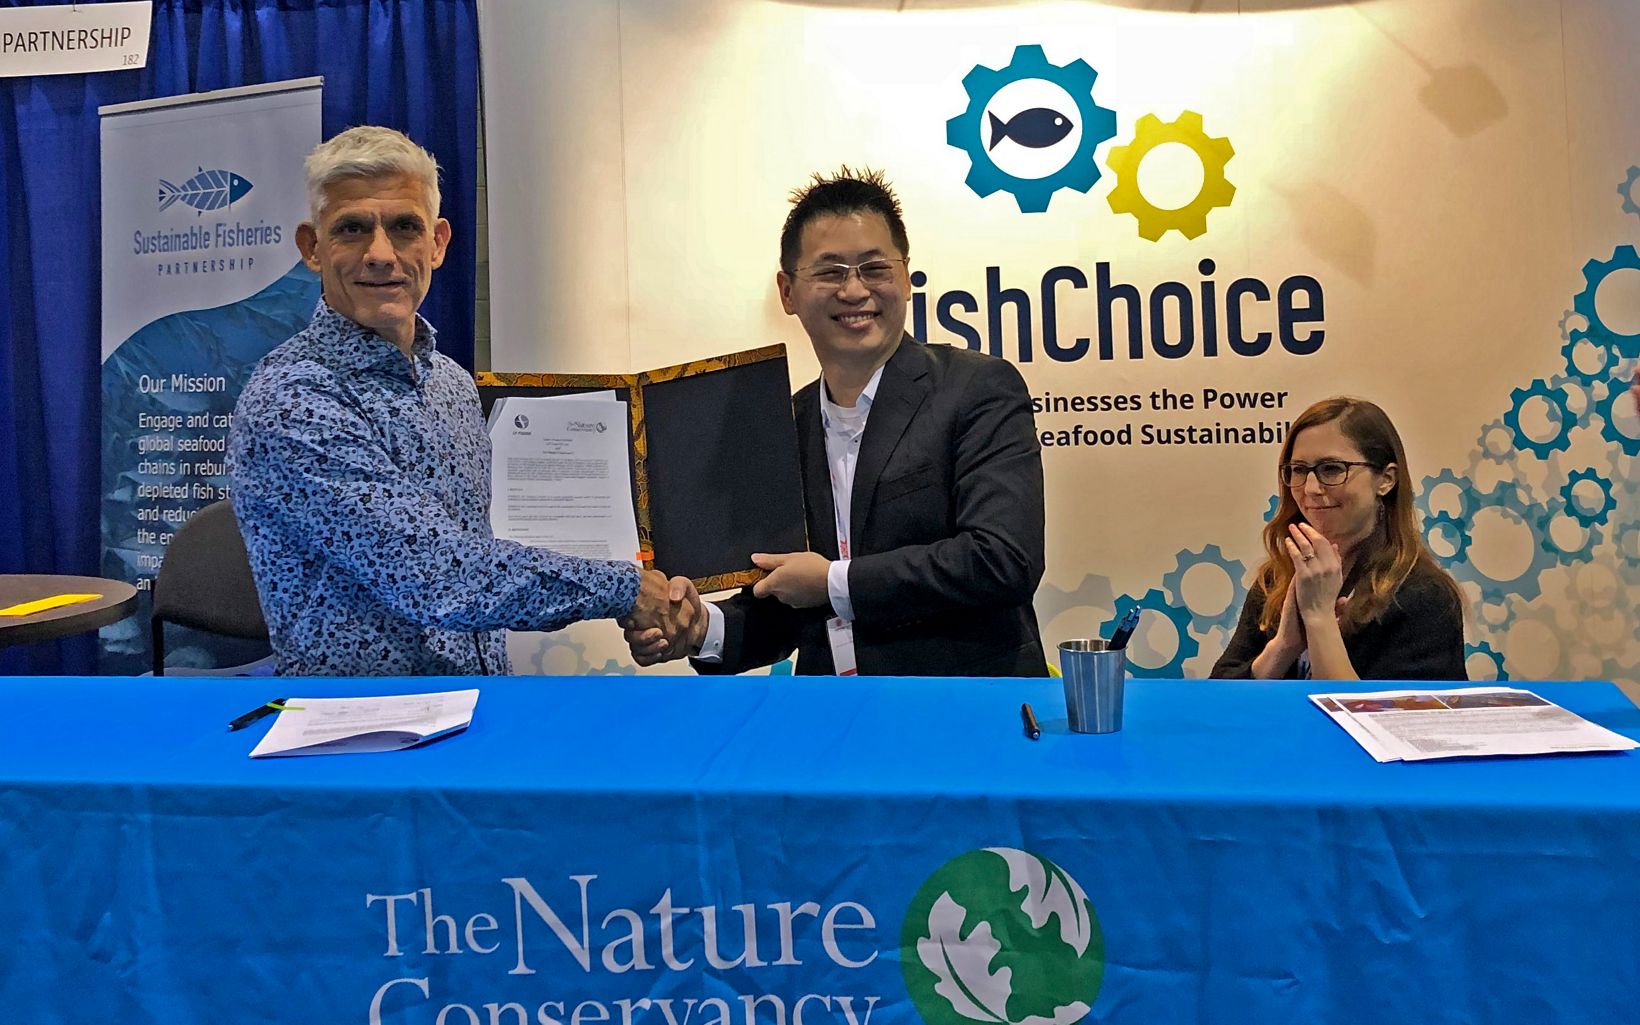 Signing for Snapper (From left) Peter Mous, Director of TNC Indonesia Fisheries Program with Sky Wong of LP Foods Pte Ltd. © TNC